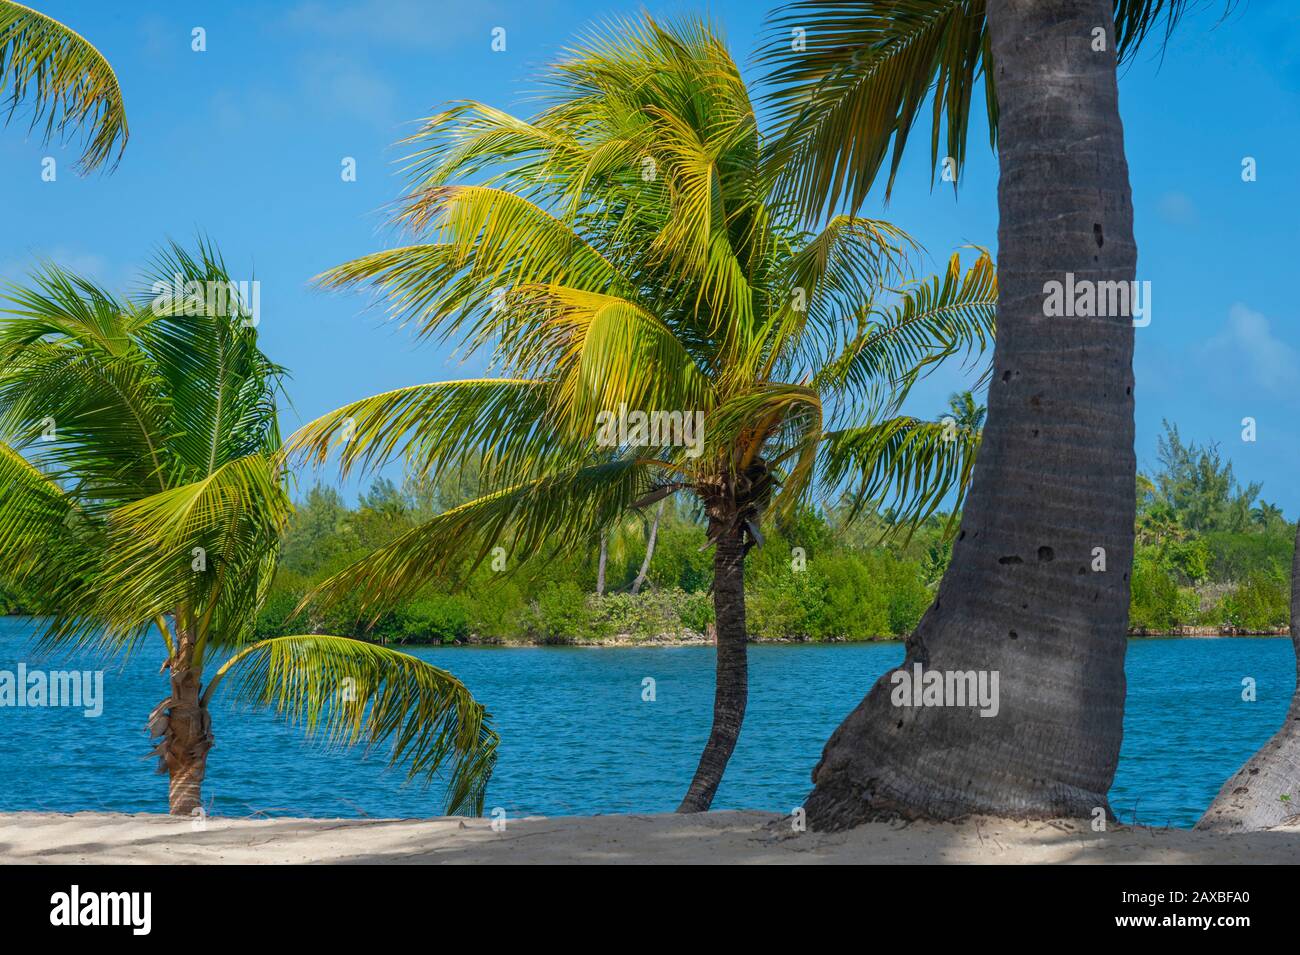 Palm trees and shadows on perfect sandy beach at calm waters edge Stock Photo